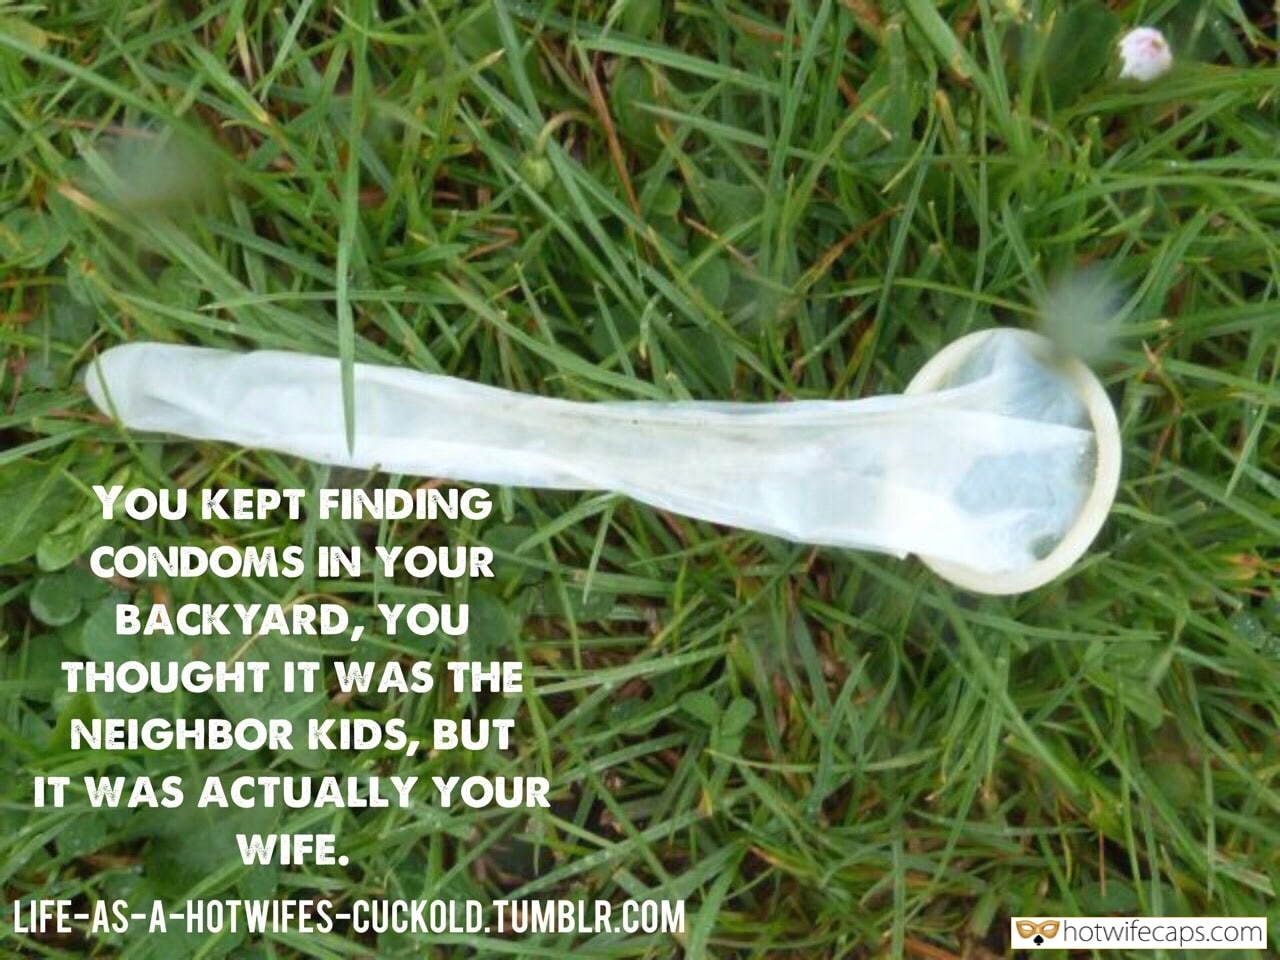 Sexy Memes Cheating hotwife caption: YOU KEPT FINDING CONDOMS IN YOUR BACKYARD, YOU THOUGHT IT WAS THE NEIGHBOR KIDS, BUT IT WAS ACTUALLY YOUR WIFE.  Your Wife Left Long Condom Full of Cum in Your Backyard